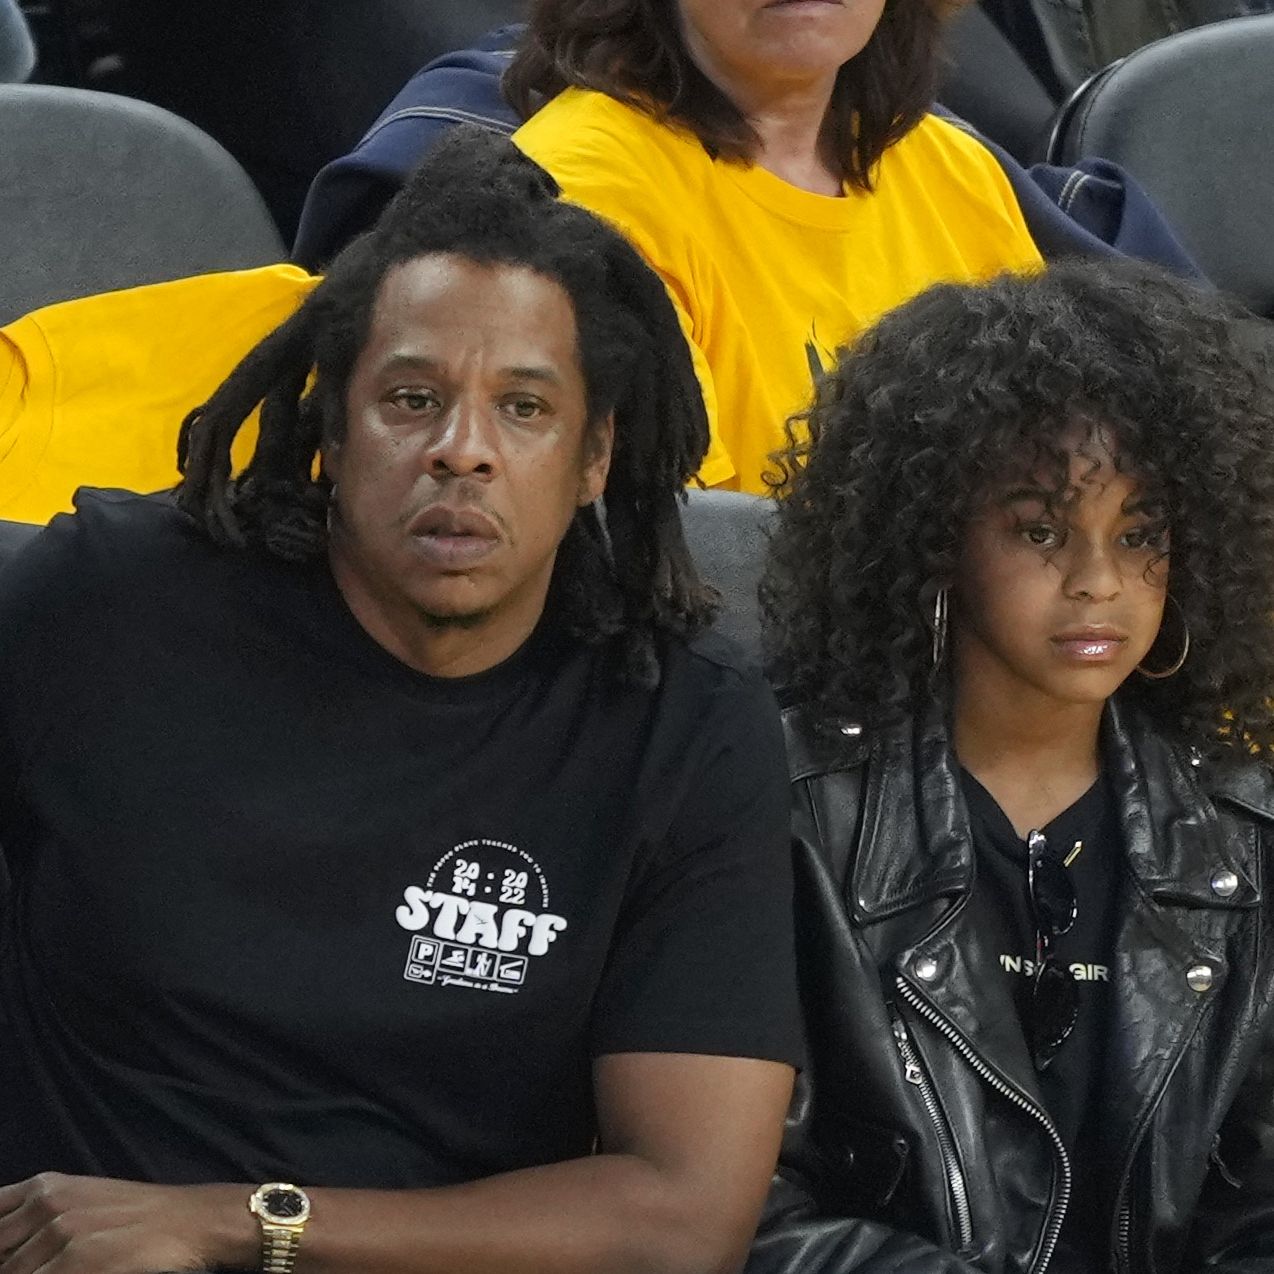 The 10-year-old looked like her mom Beyoncé's mini me.